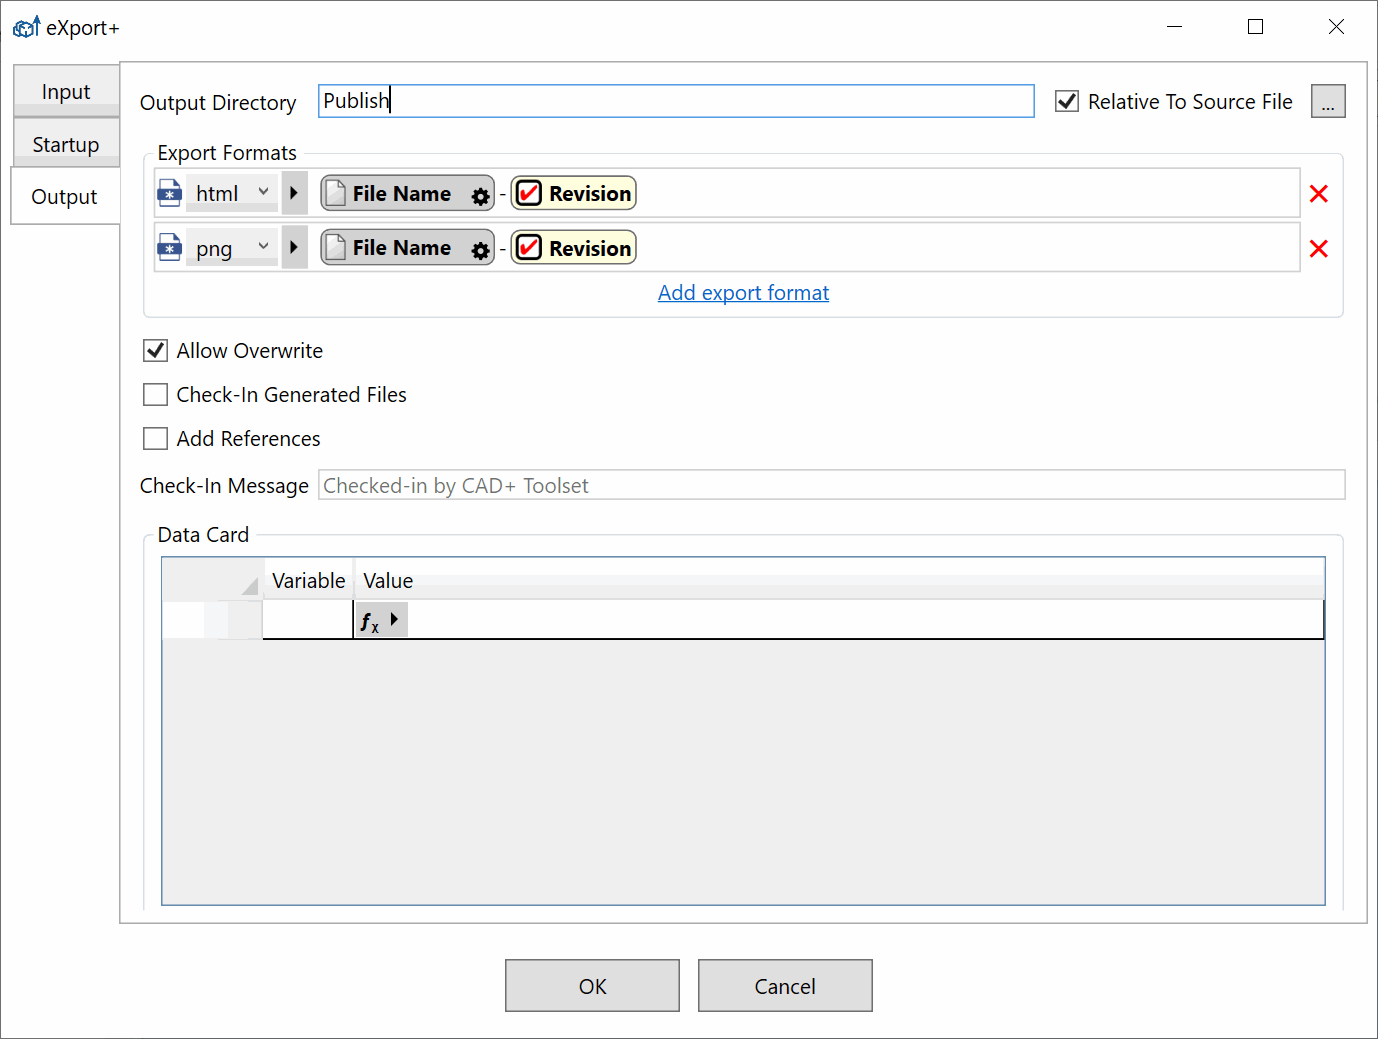 Launch settings of eXport+